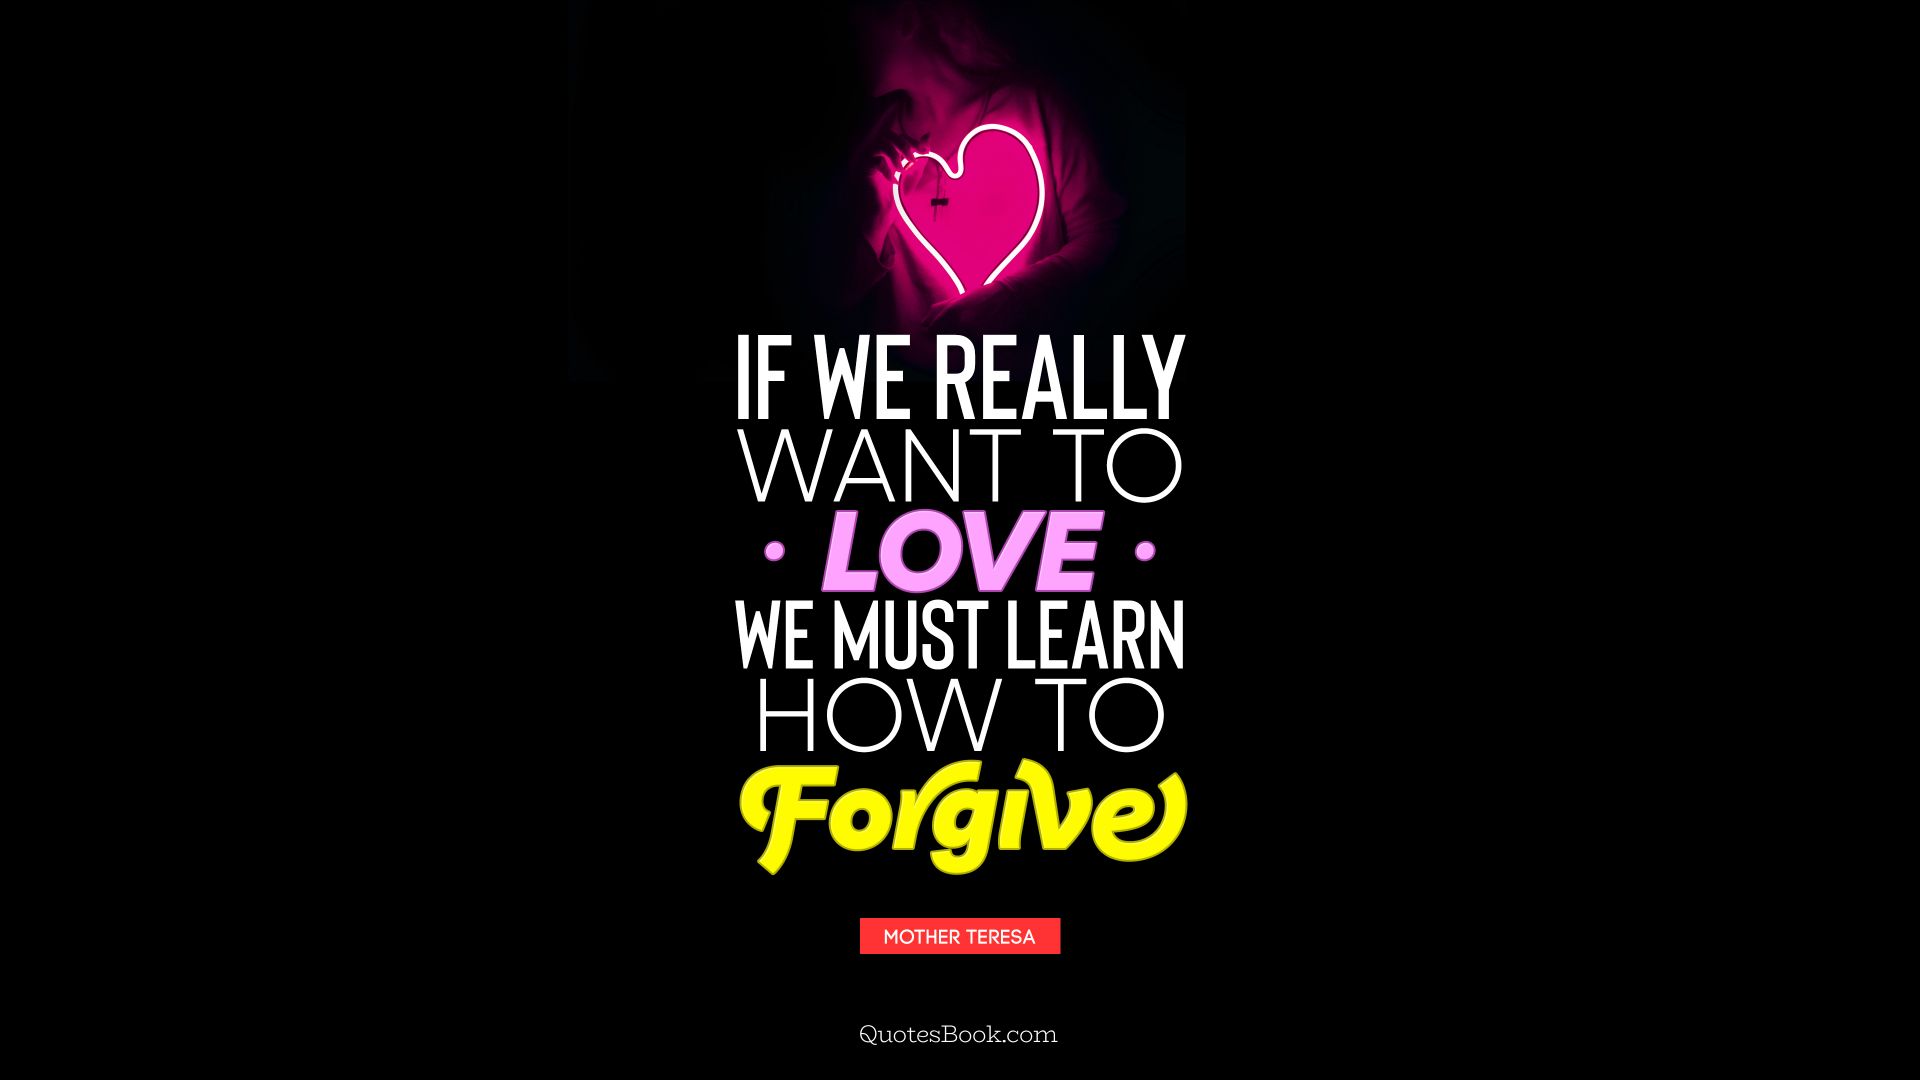 If we really want to love we must learn how to forgive. - Quote by Mother Teresa